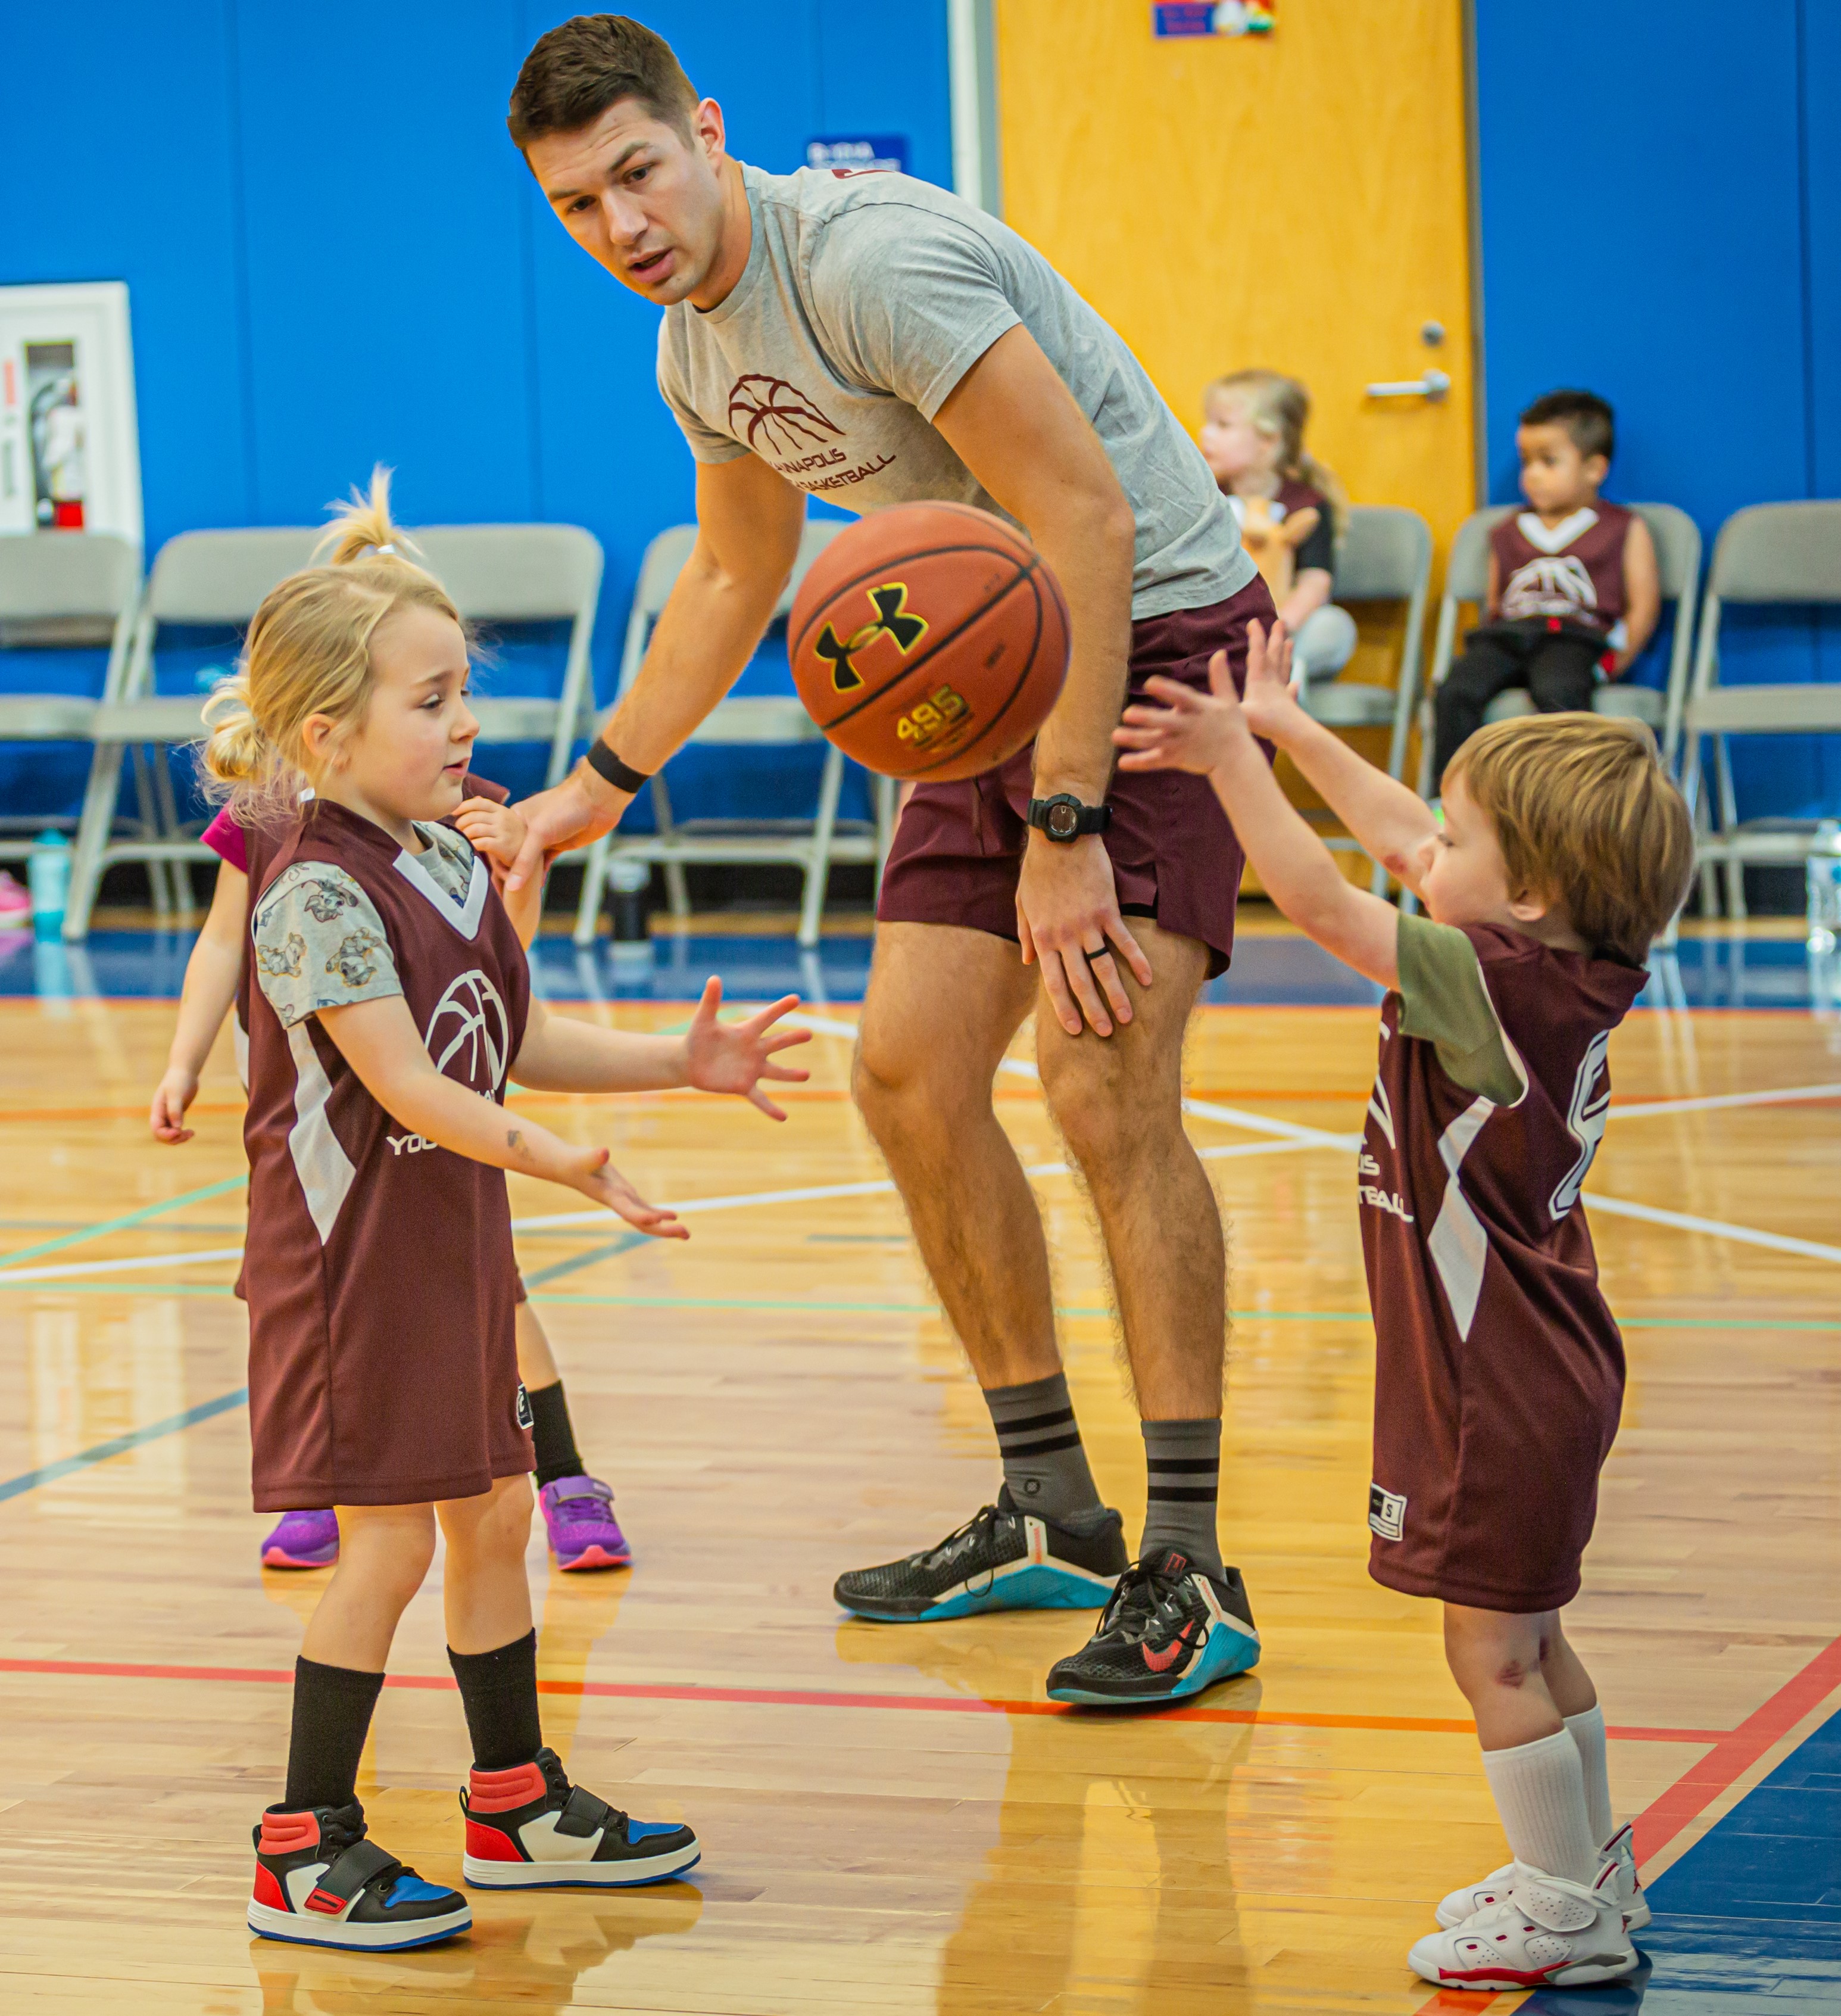 coach instructing young basketball players